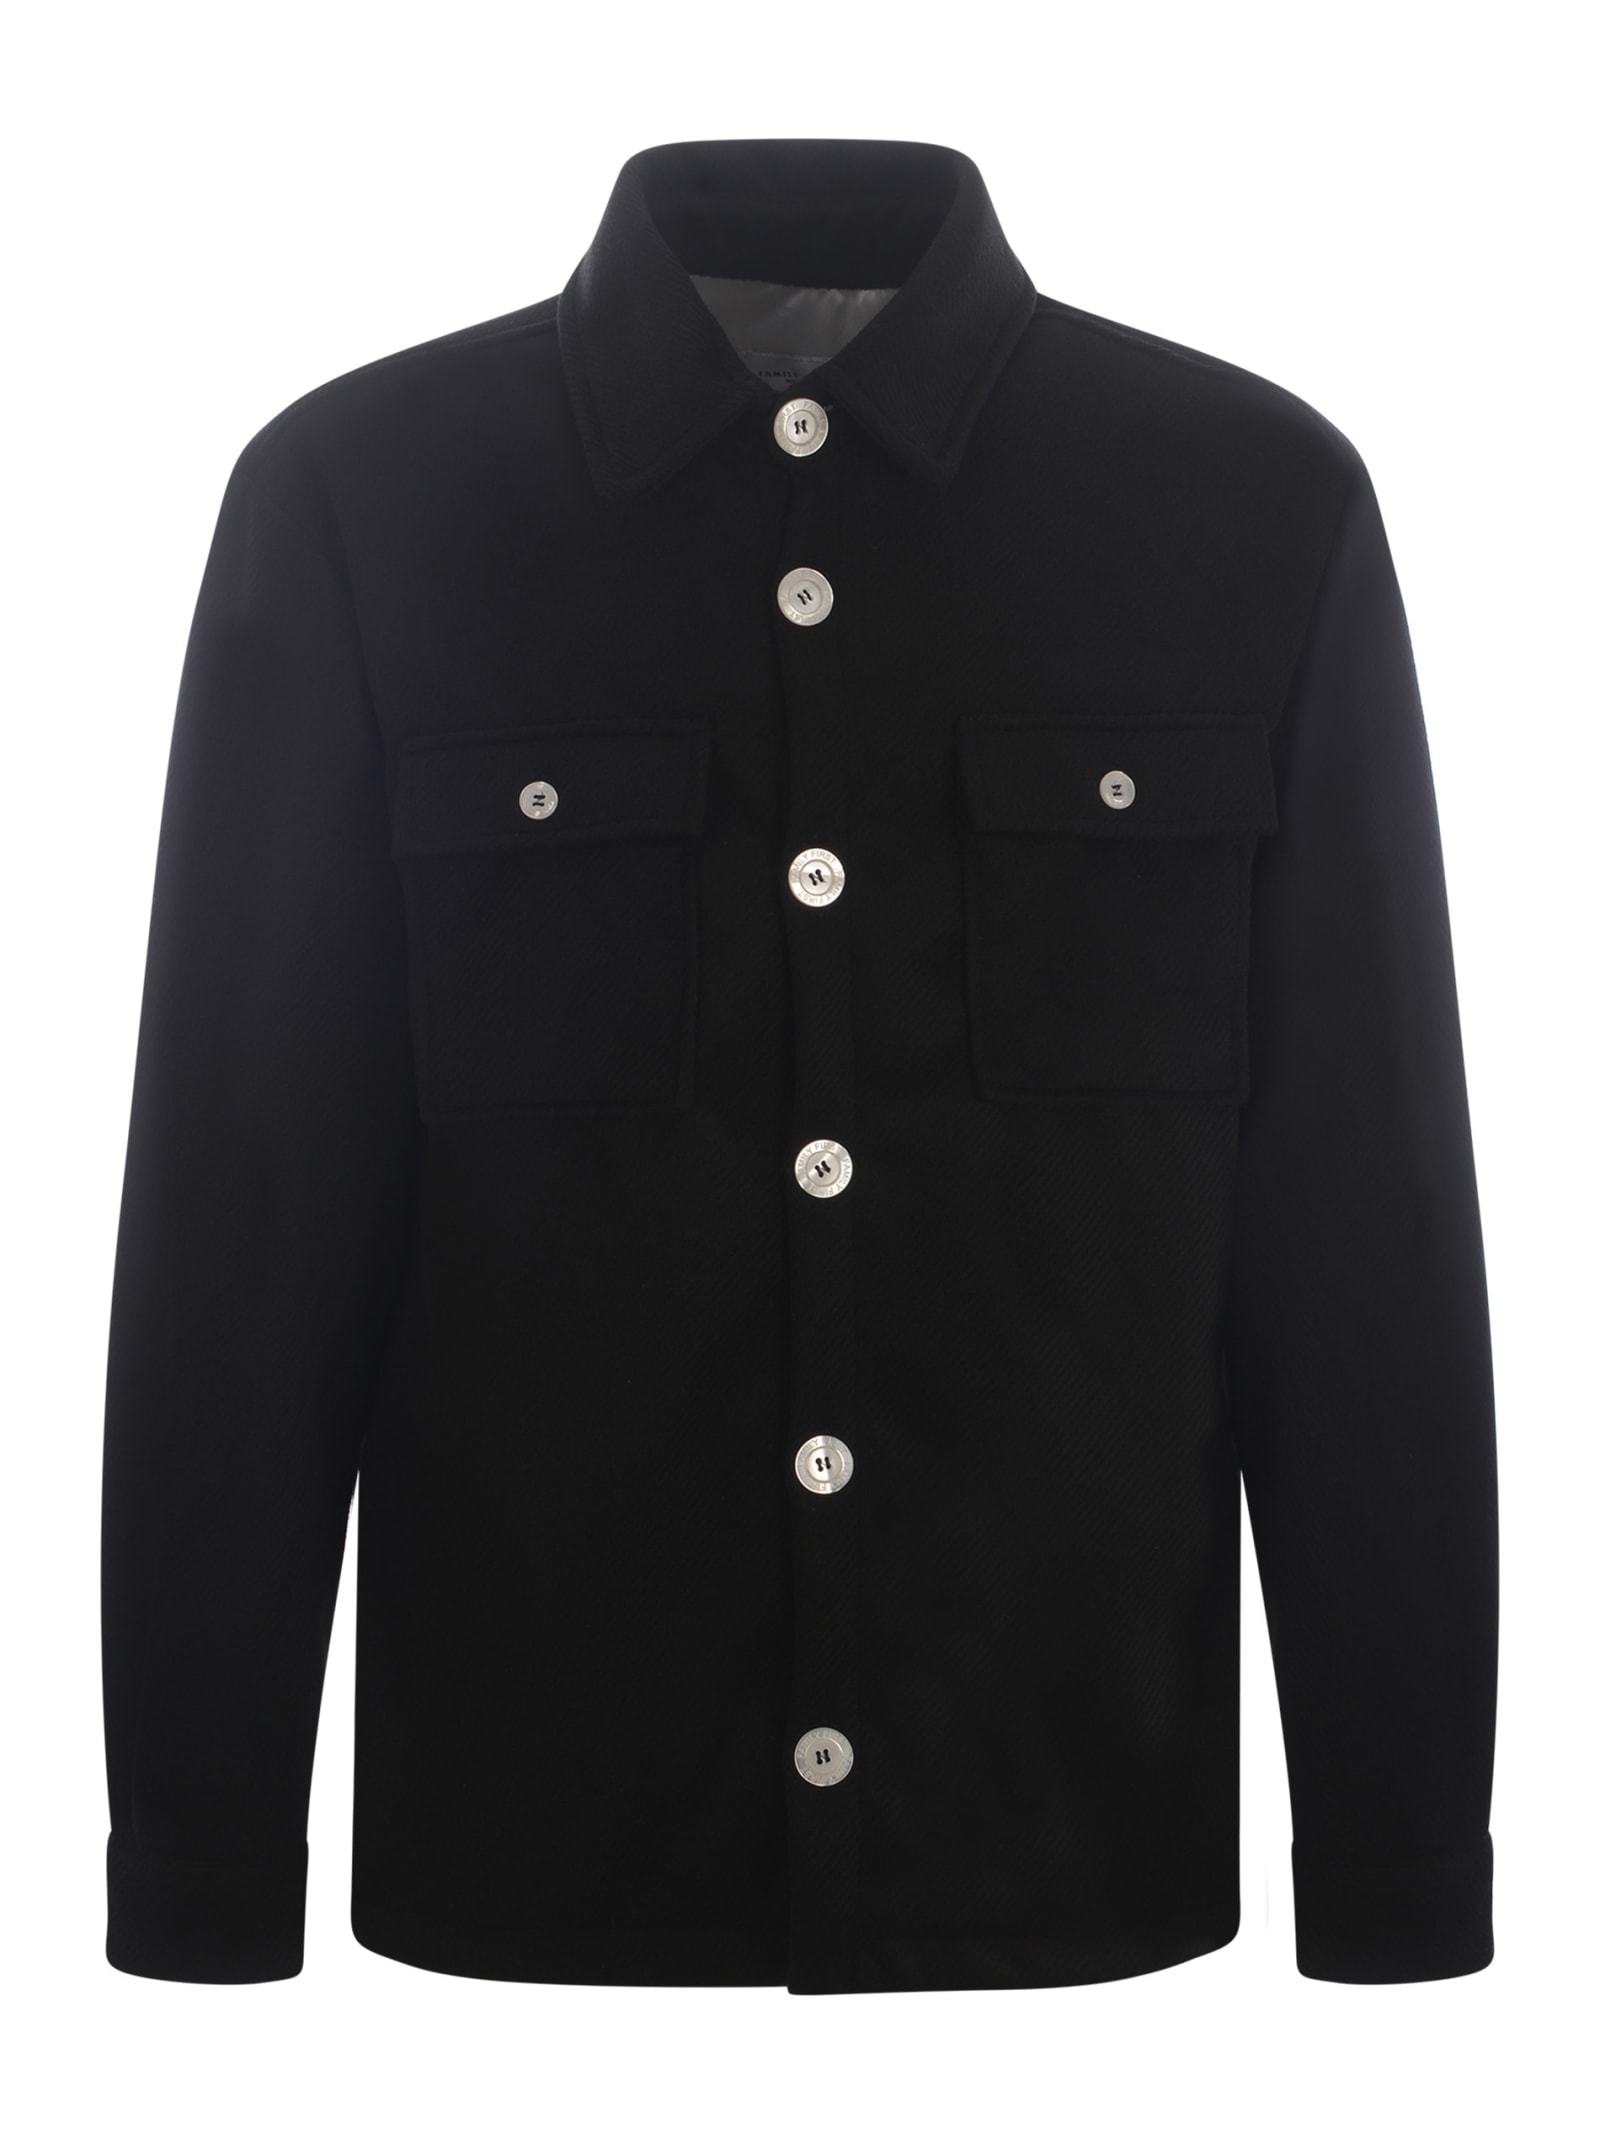 Family First Milano Shirt Jacket Family First In Terry Fabric In Black